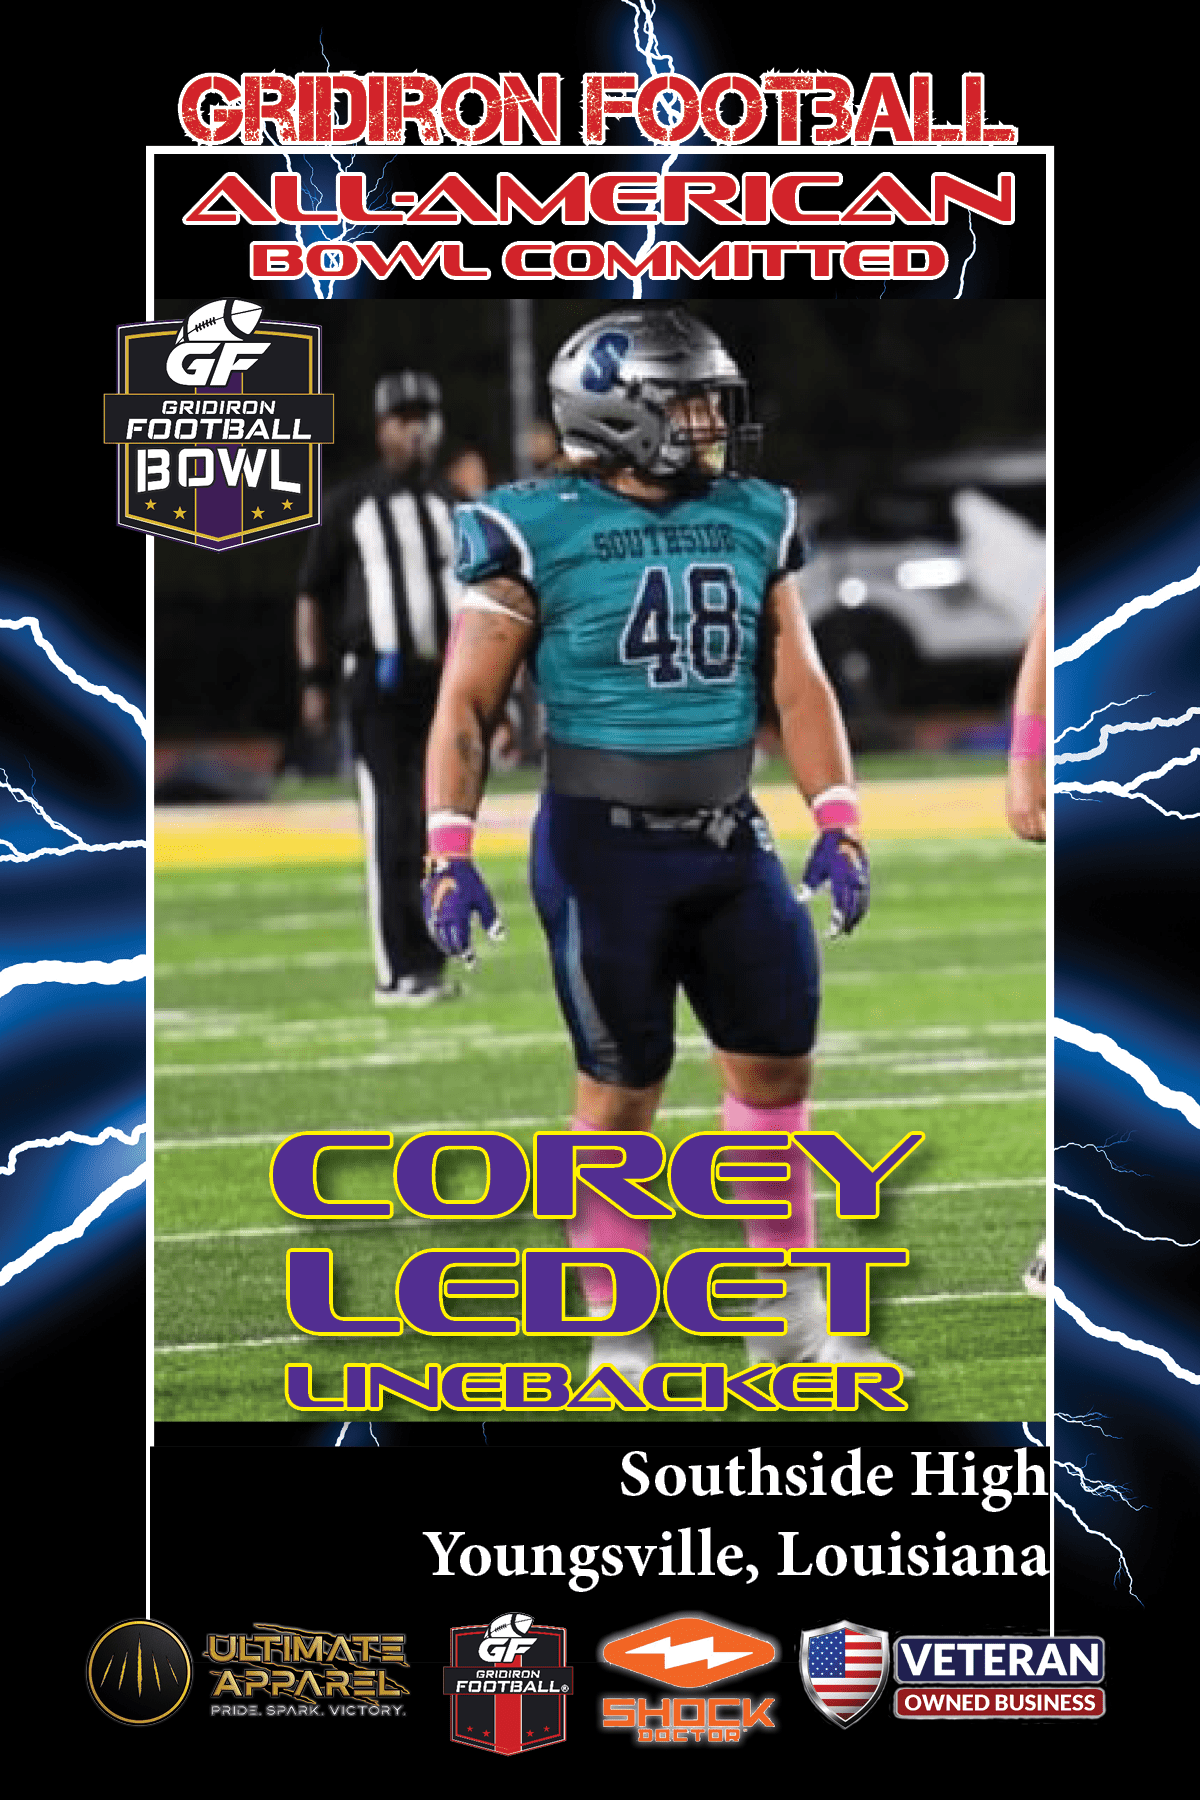 BREAKING NEWS: Southside High School (Youngsville, LA) LB Corey Ledet Jr. Commits To The Gridiron Football All-American Bowl Game